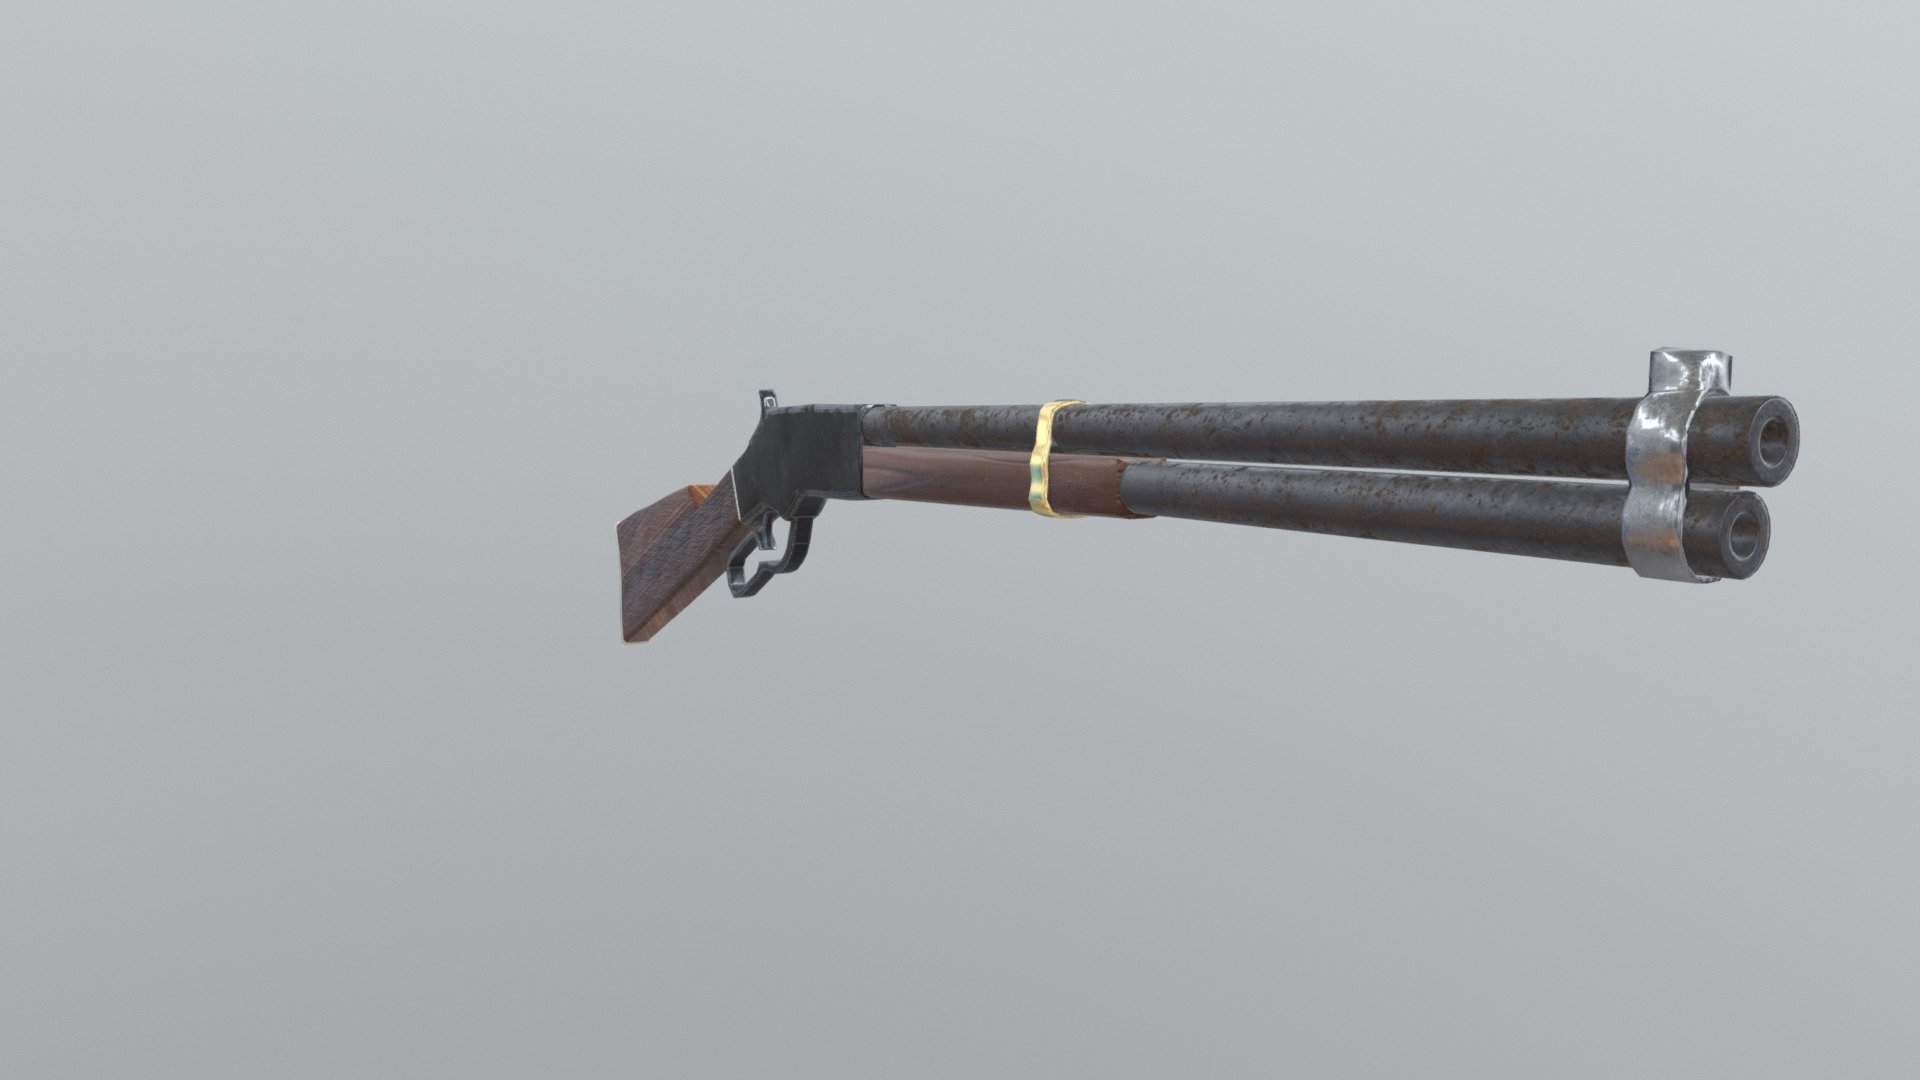 Very first attempt at creating a model of a Winchester 1866, I think I did rather well for my first attempt, at texturing it with Substance Painter 3d model